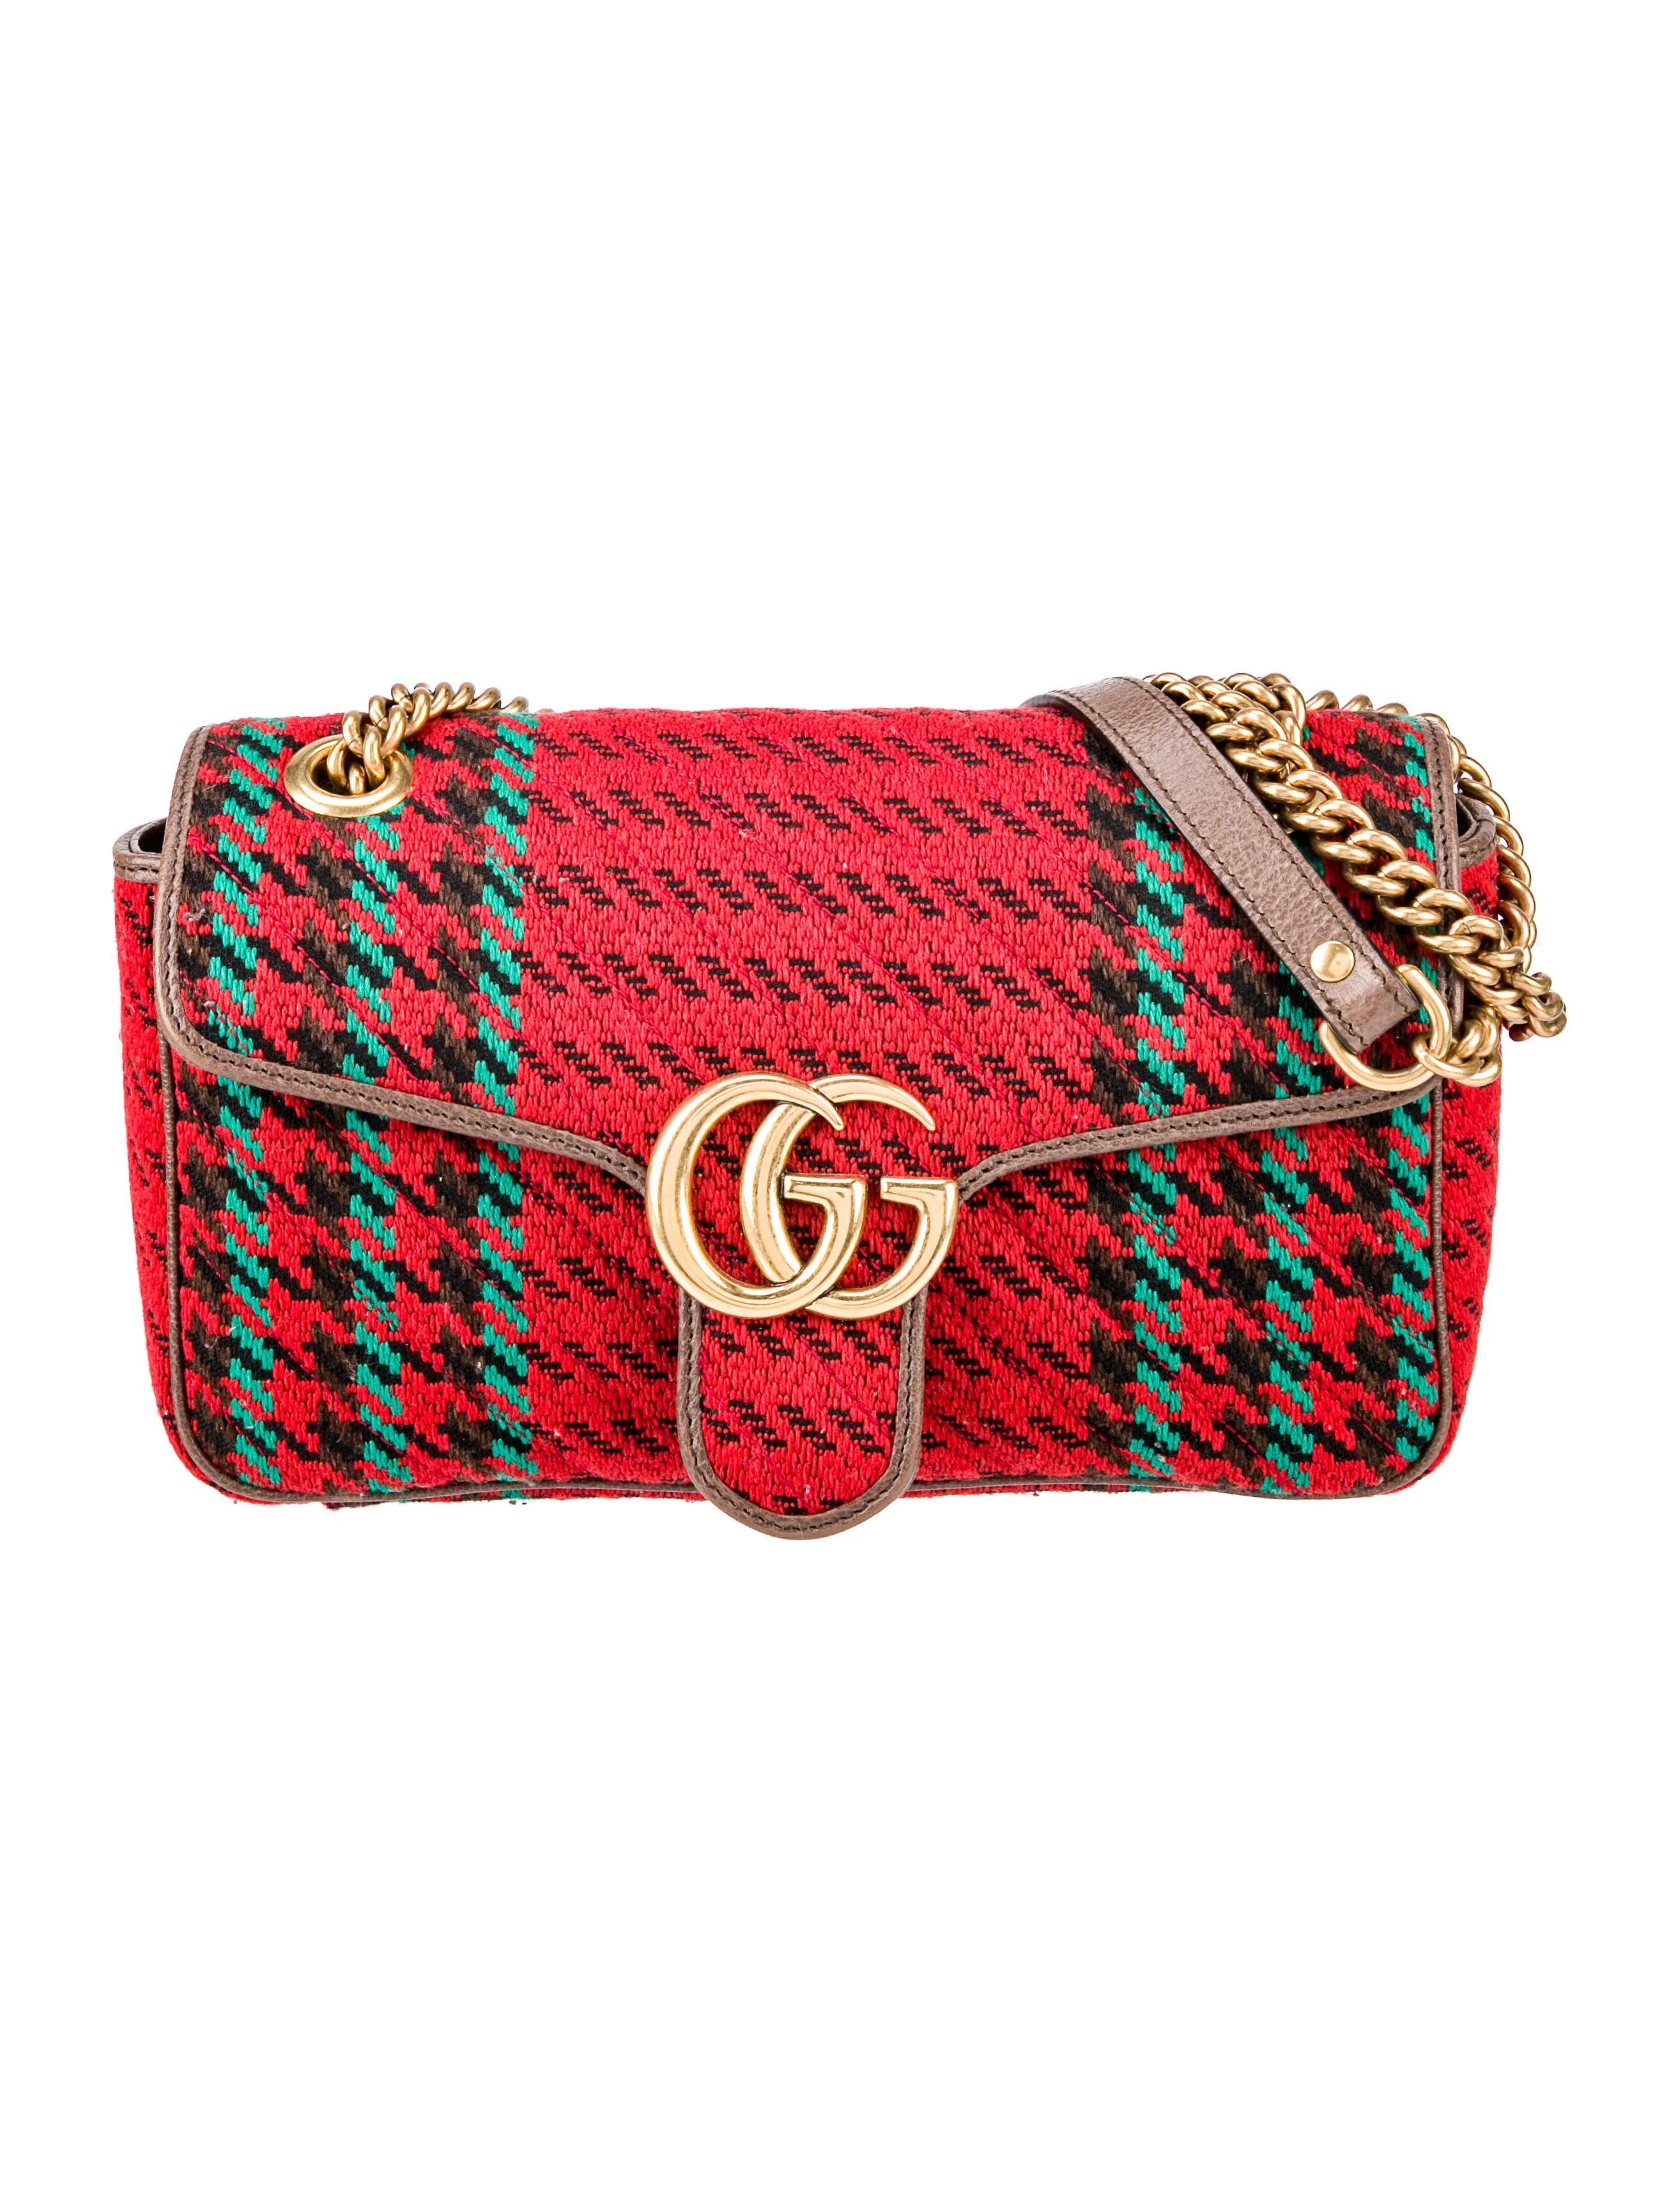 GG Marmont Small Houndstooth Shoulder Bag | The RealReal